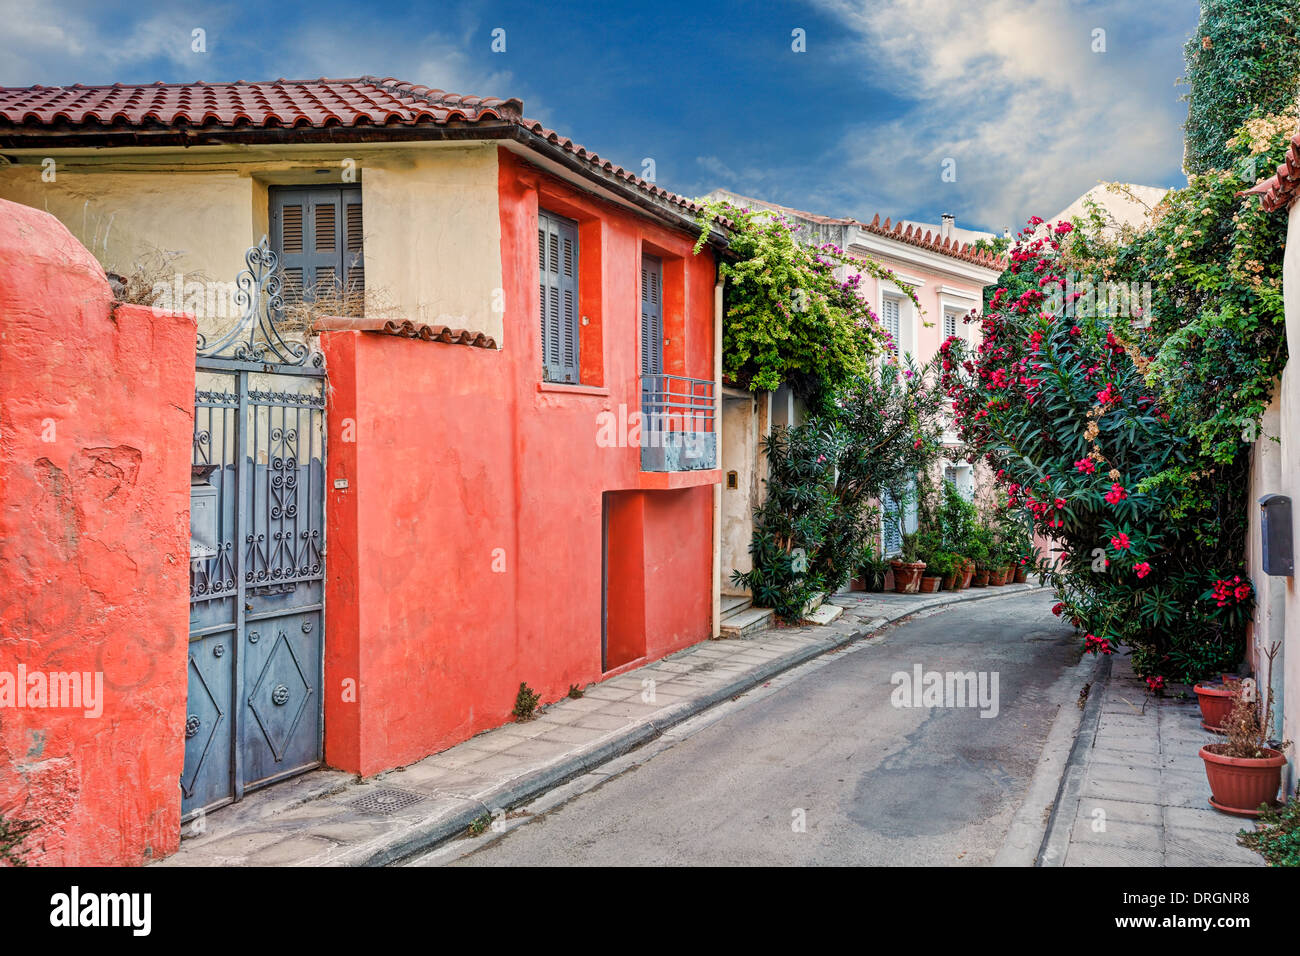 The picturesque buildings of Plaka in Athens, Greece Stock Photo